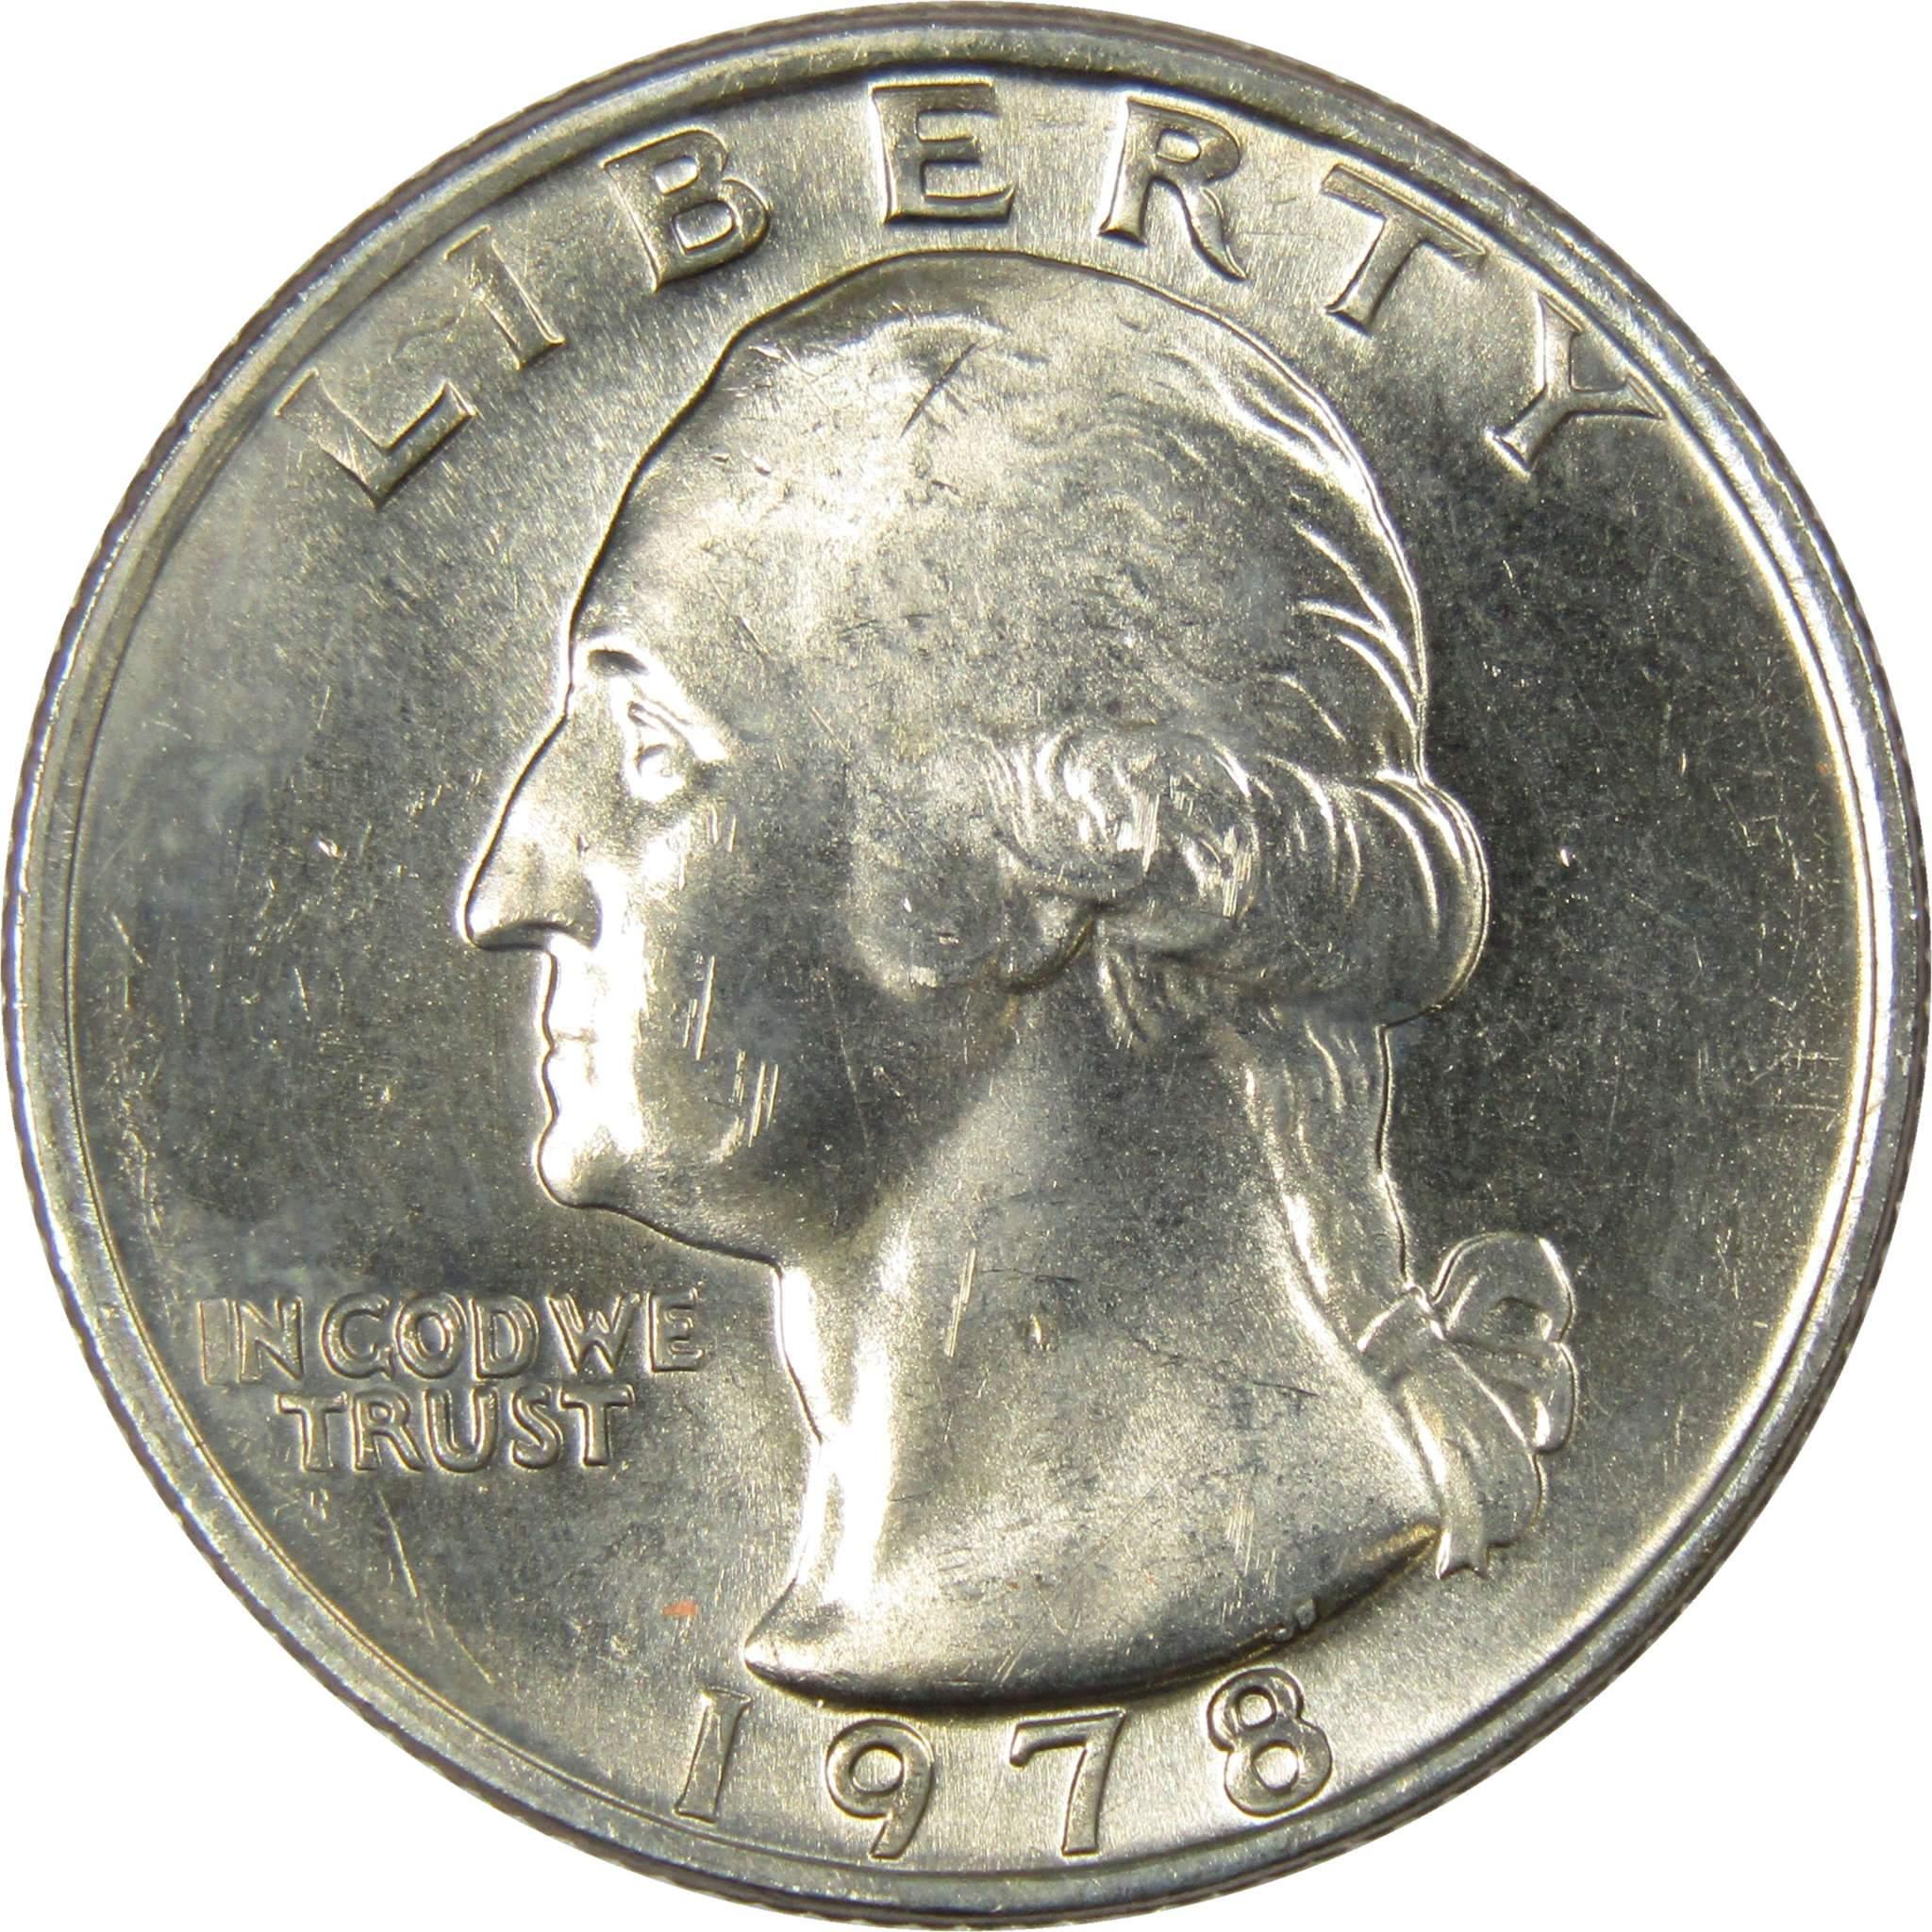 1978 Washington Quarter BU Uncirculated Mint State 25c US Coin Collectible